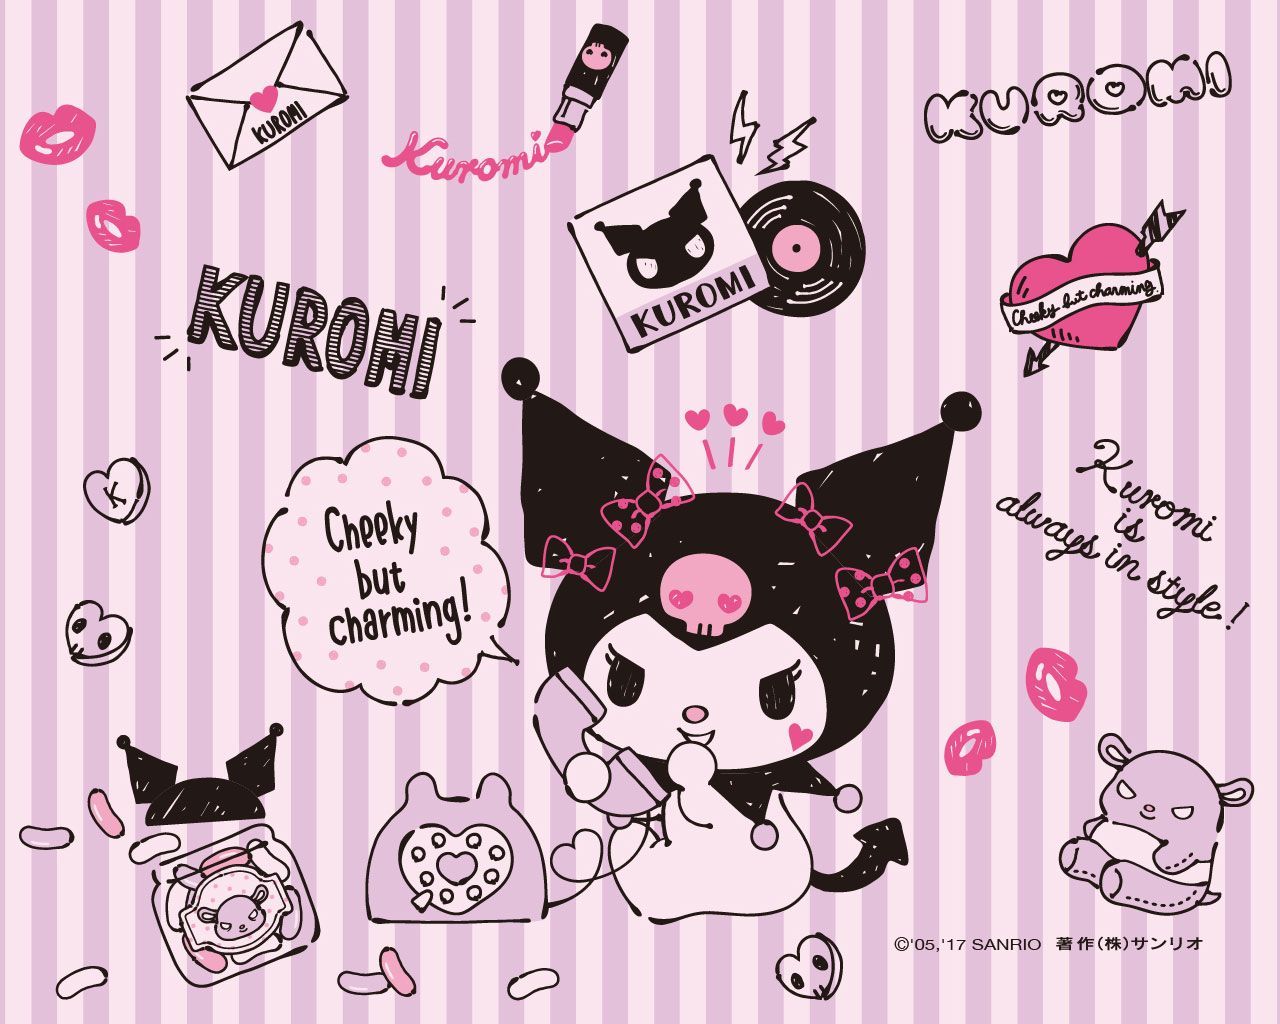 A Kuromi wallpaper with her on the phone and stickers around her - 1280x1024, Kuromi